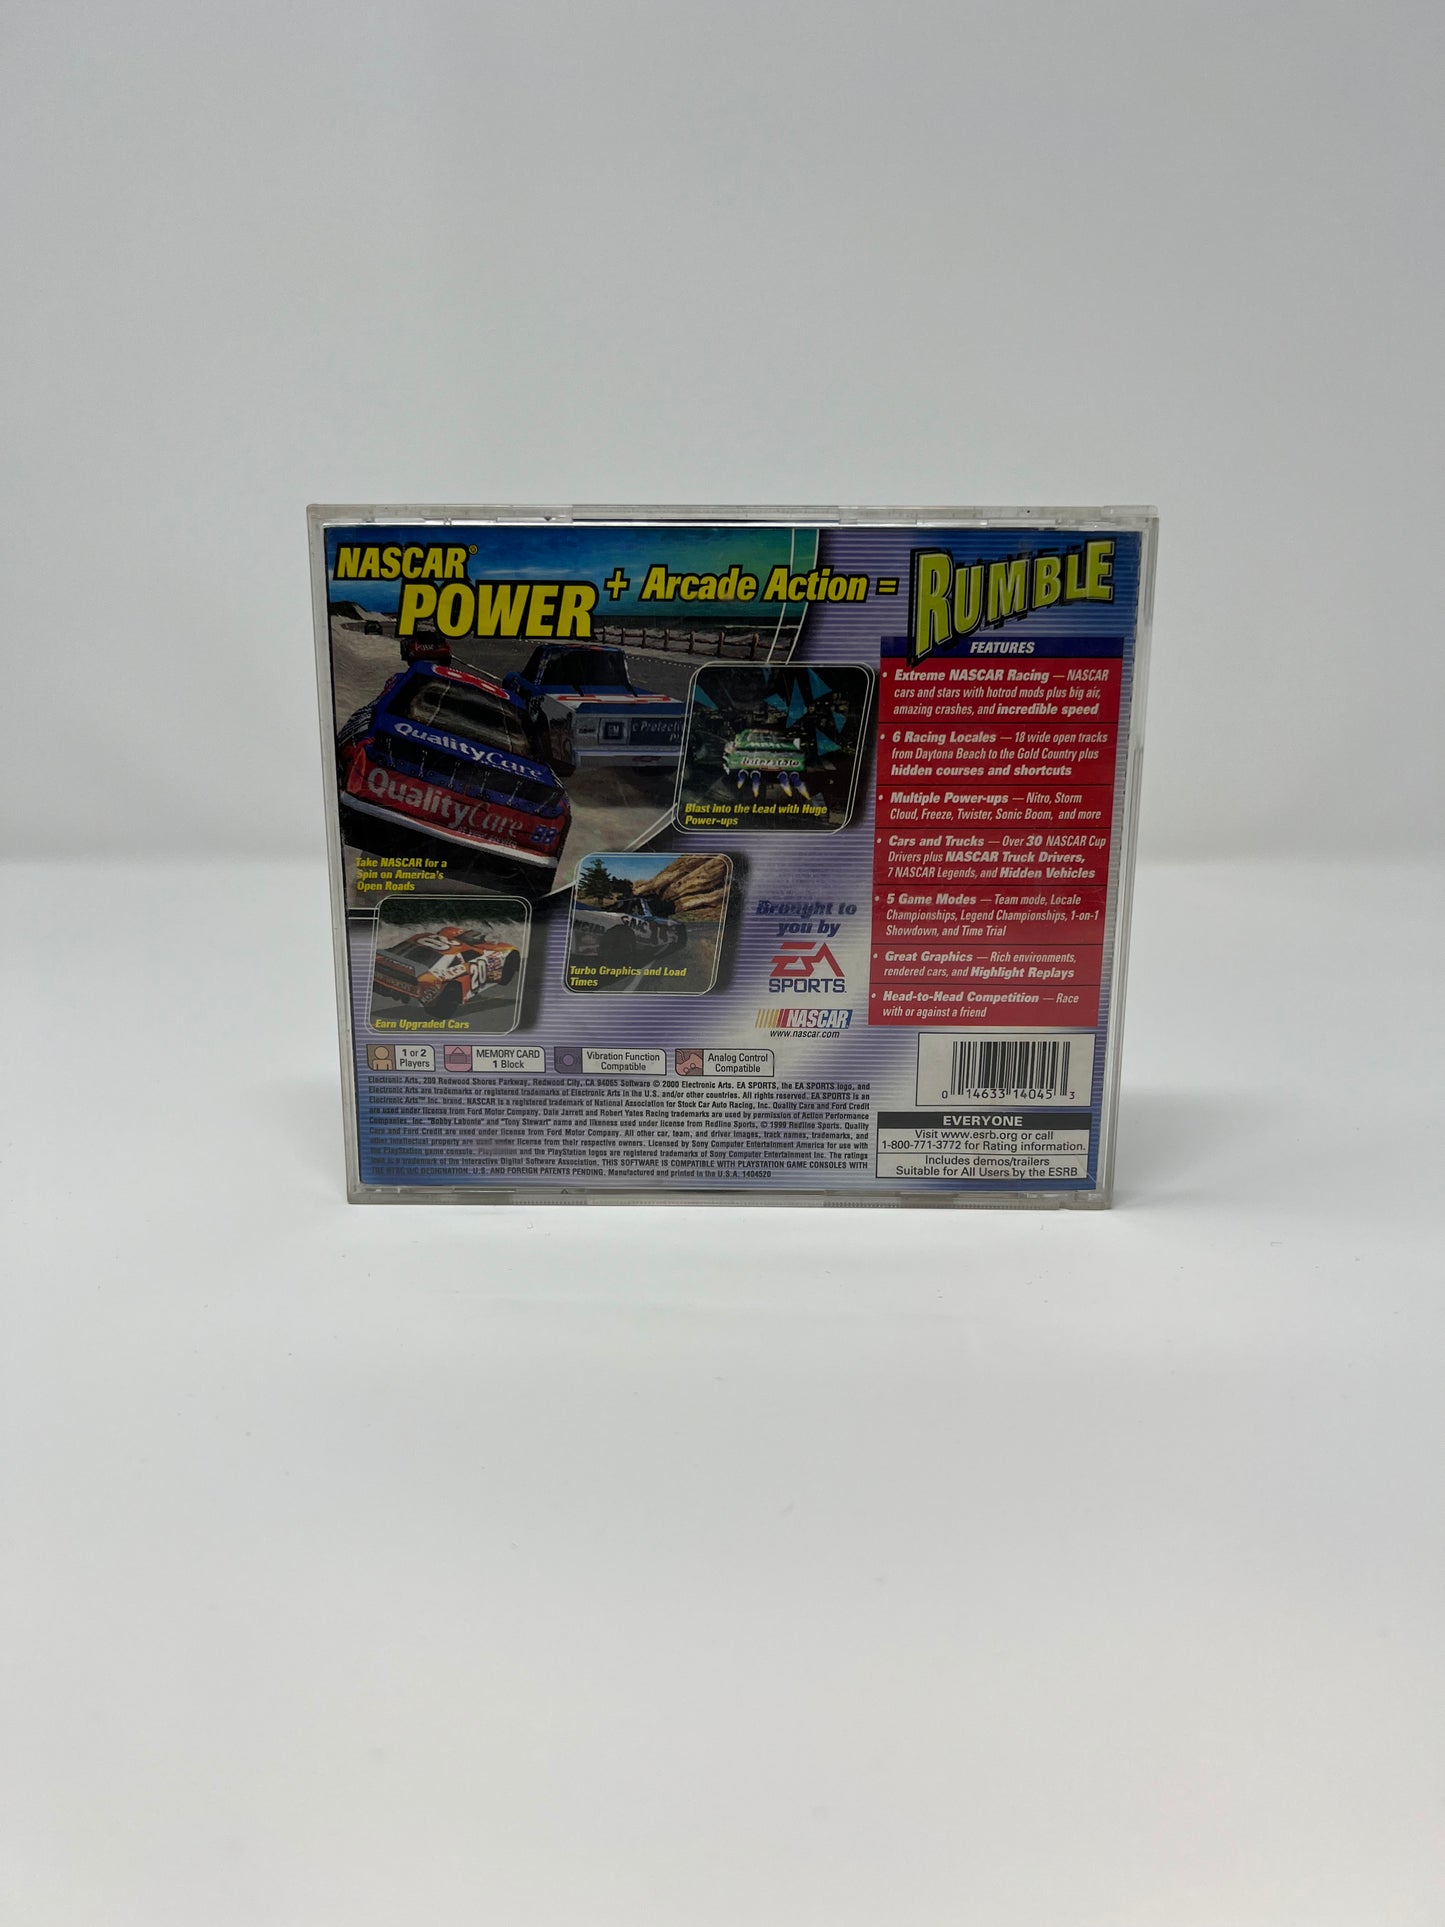 NASCAR Rumble - PS1 Game - Used